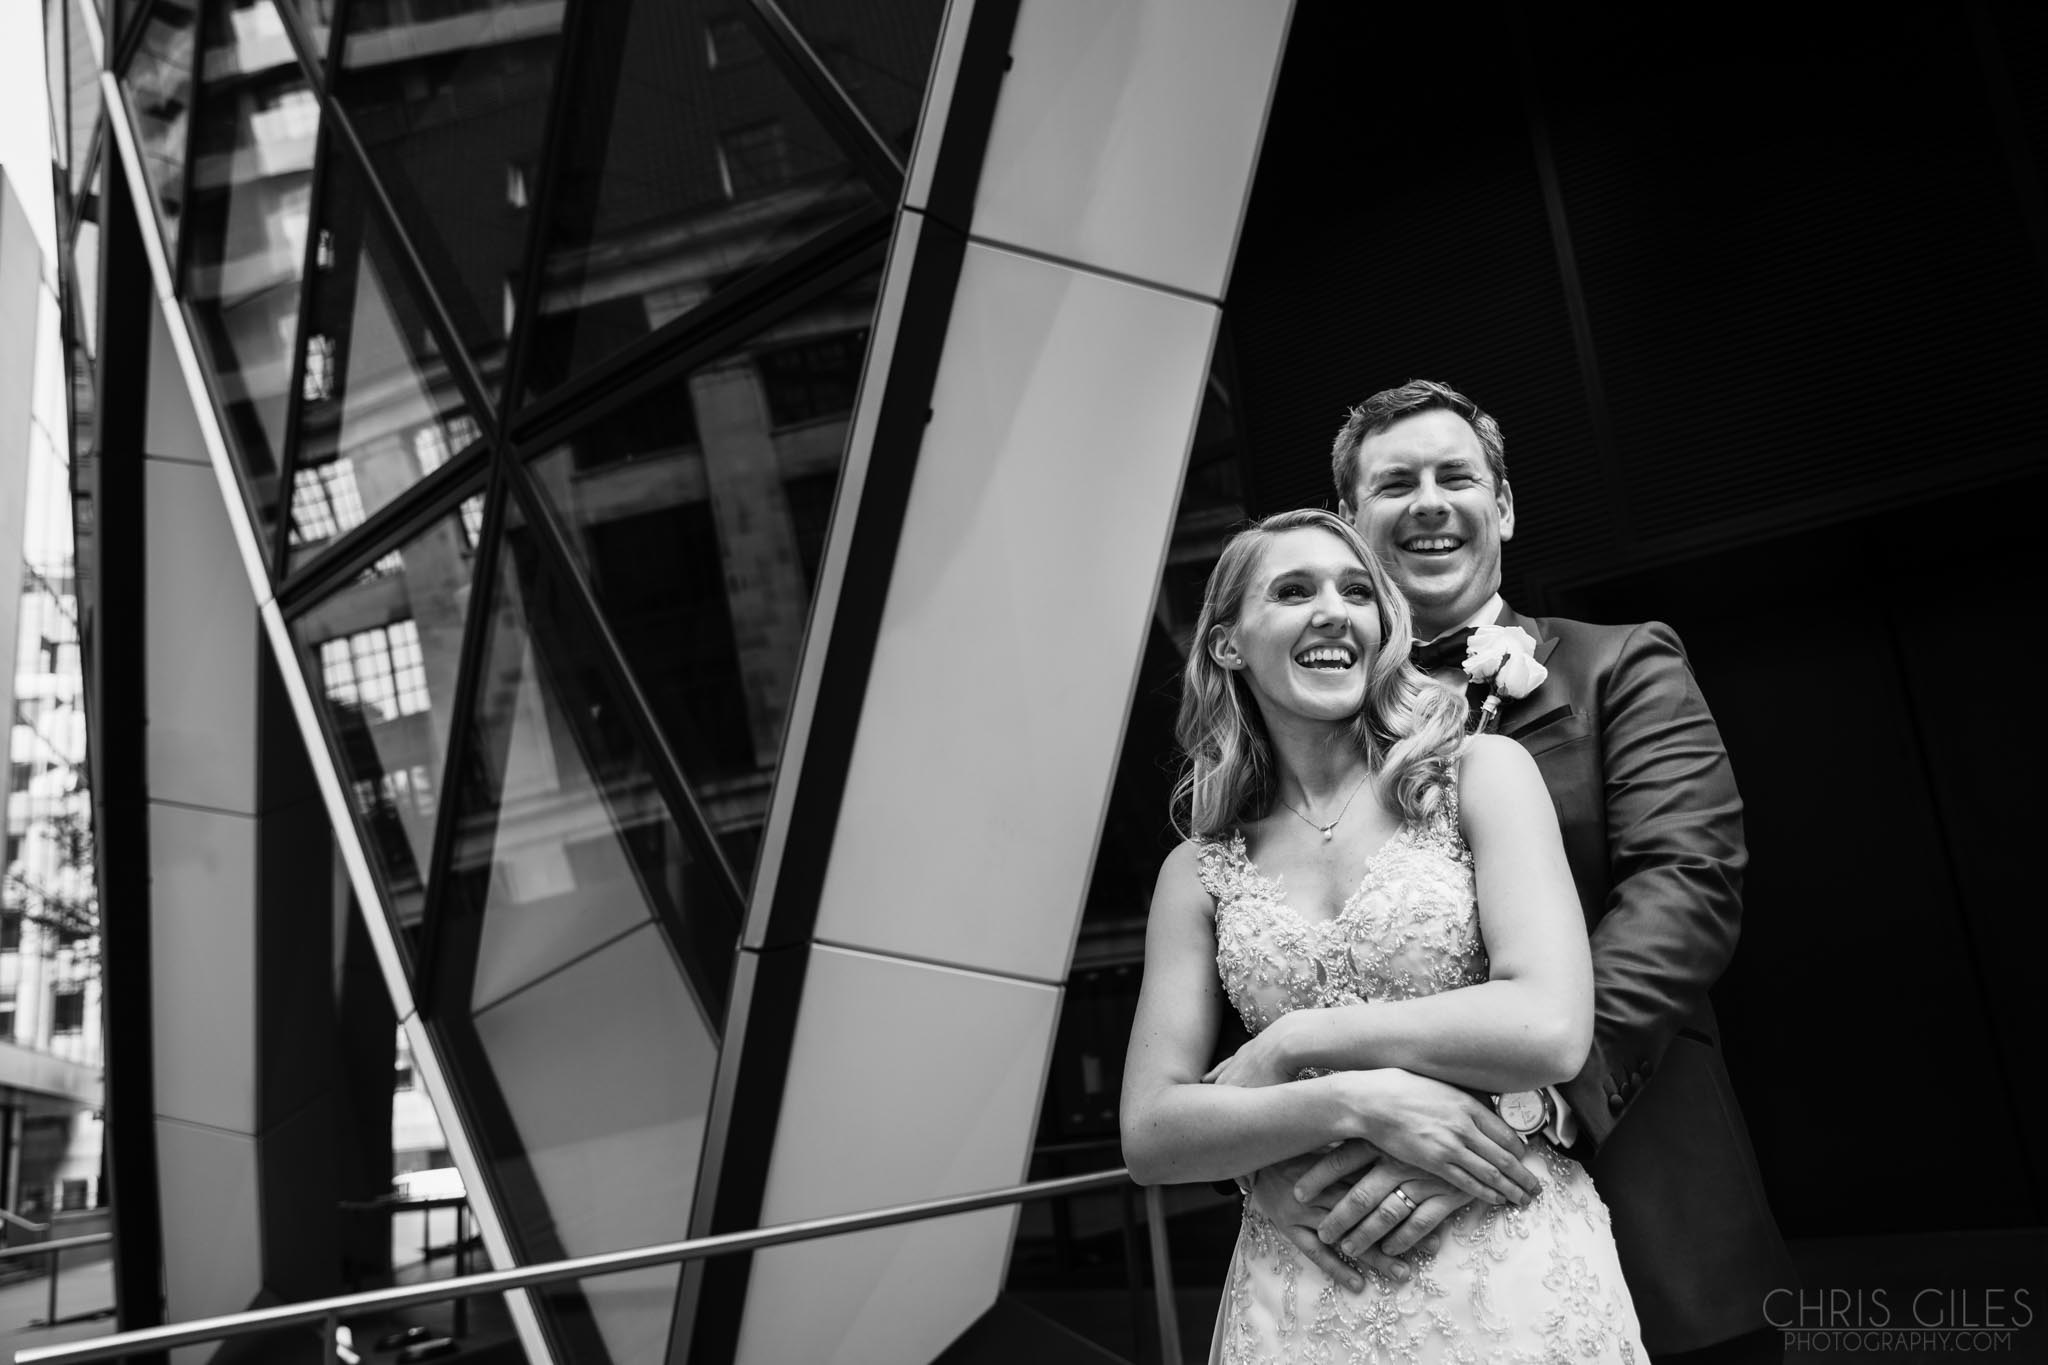 Wedding at Searcy's The Gherkin London